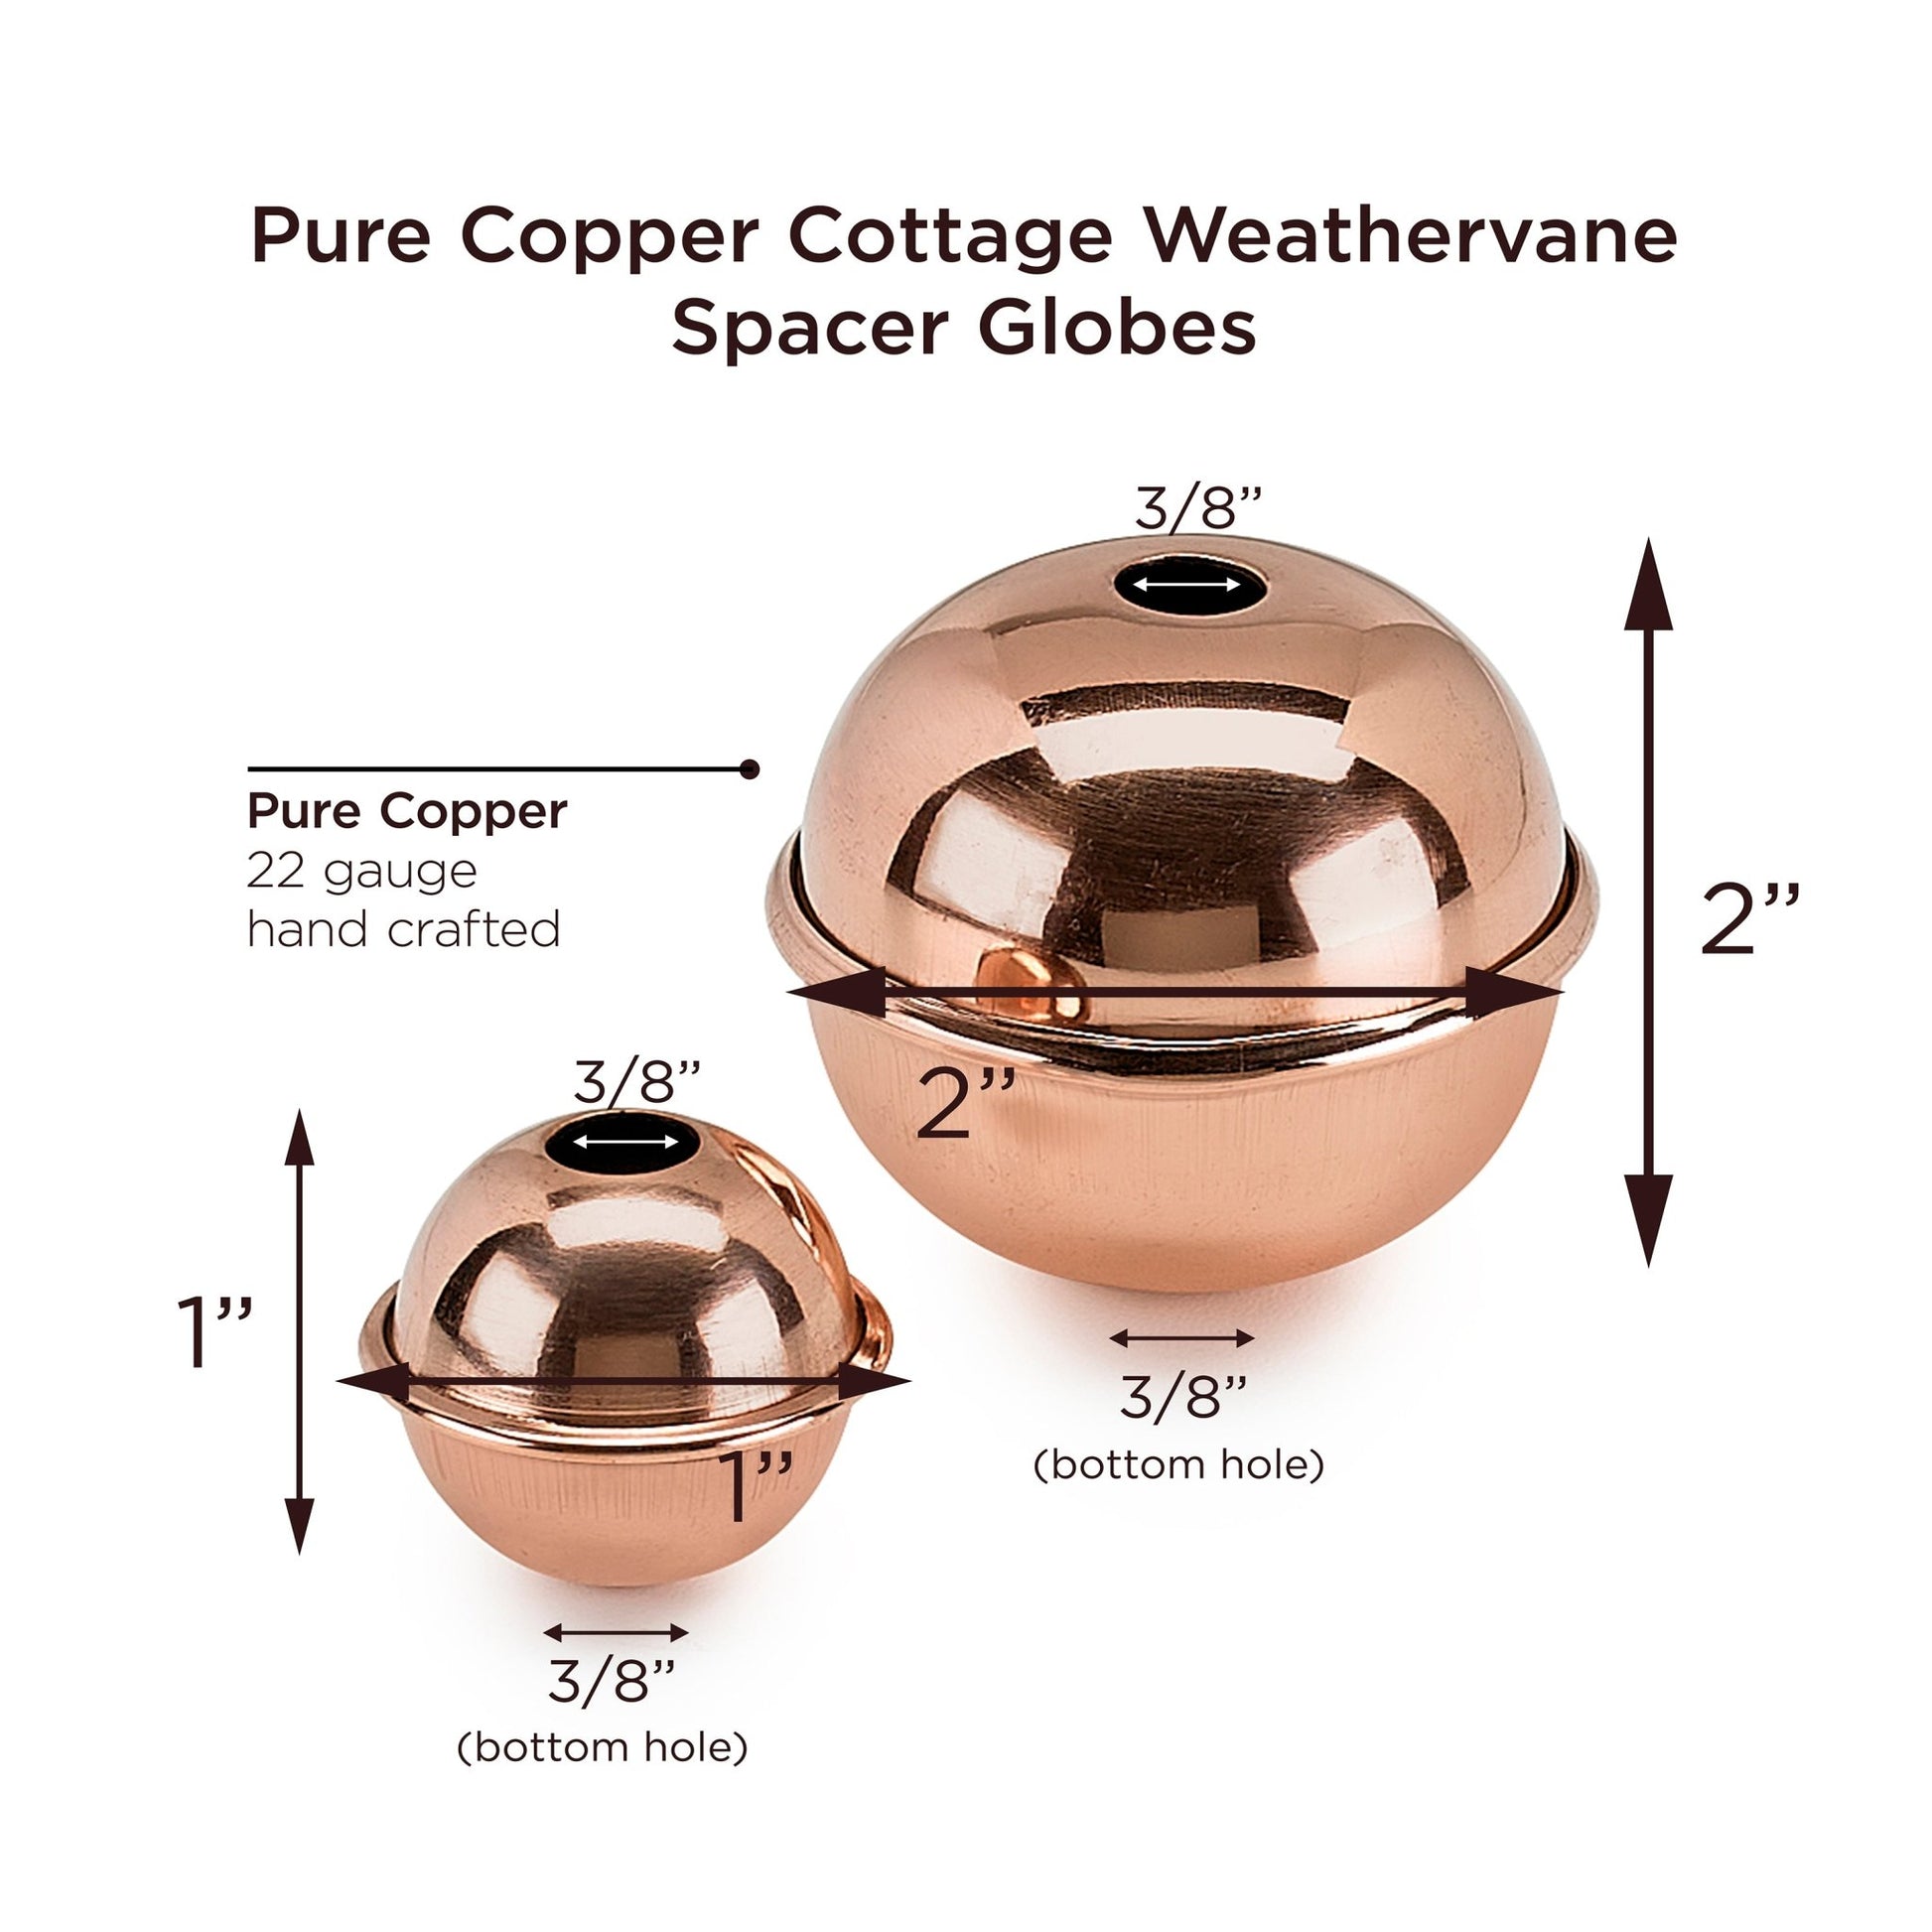 Copper Weathervane 1" & 2" Spacer Ball Set - Good Directions